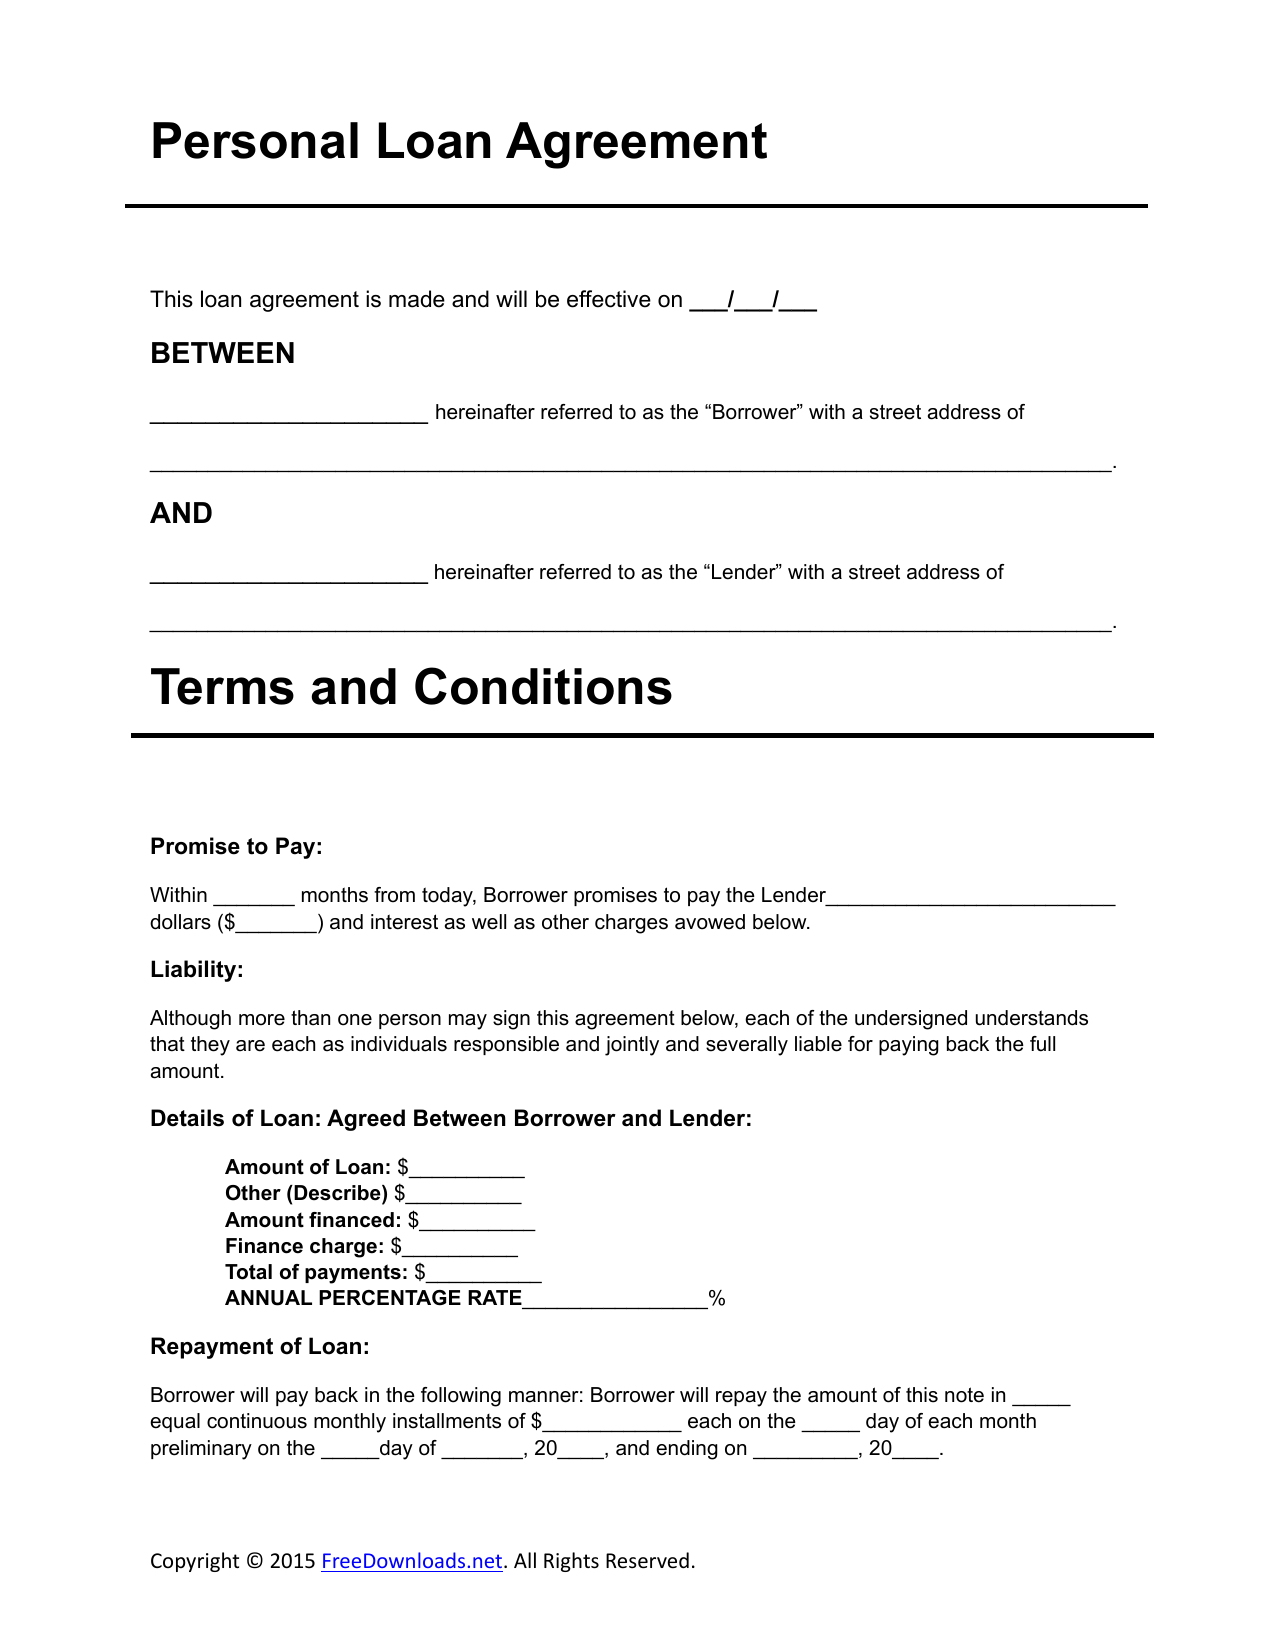 Download Personal Loan Agreement Template | Pdf | Rtf | Word - Free Printable Loan Forms